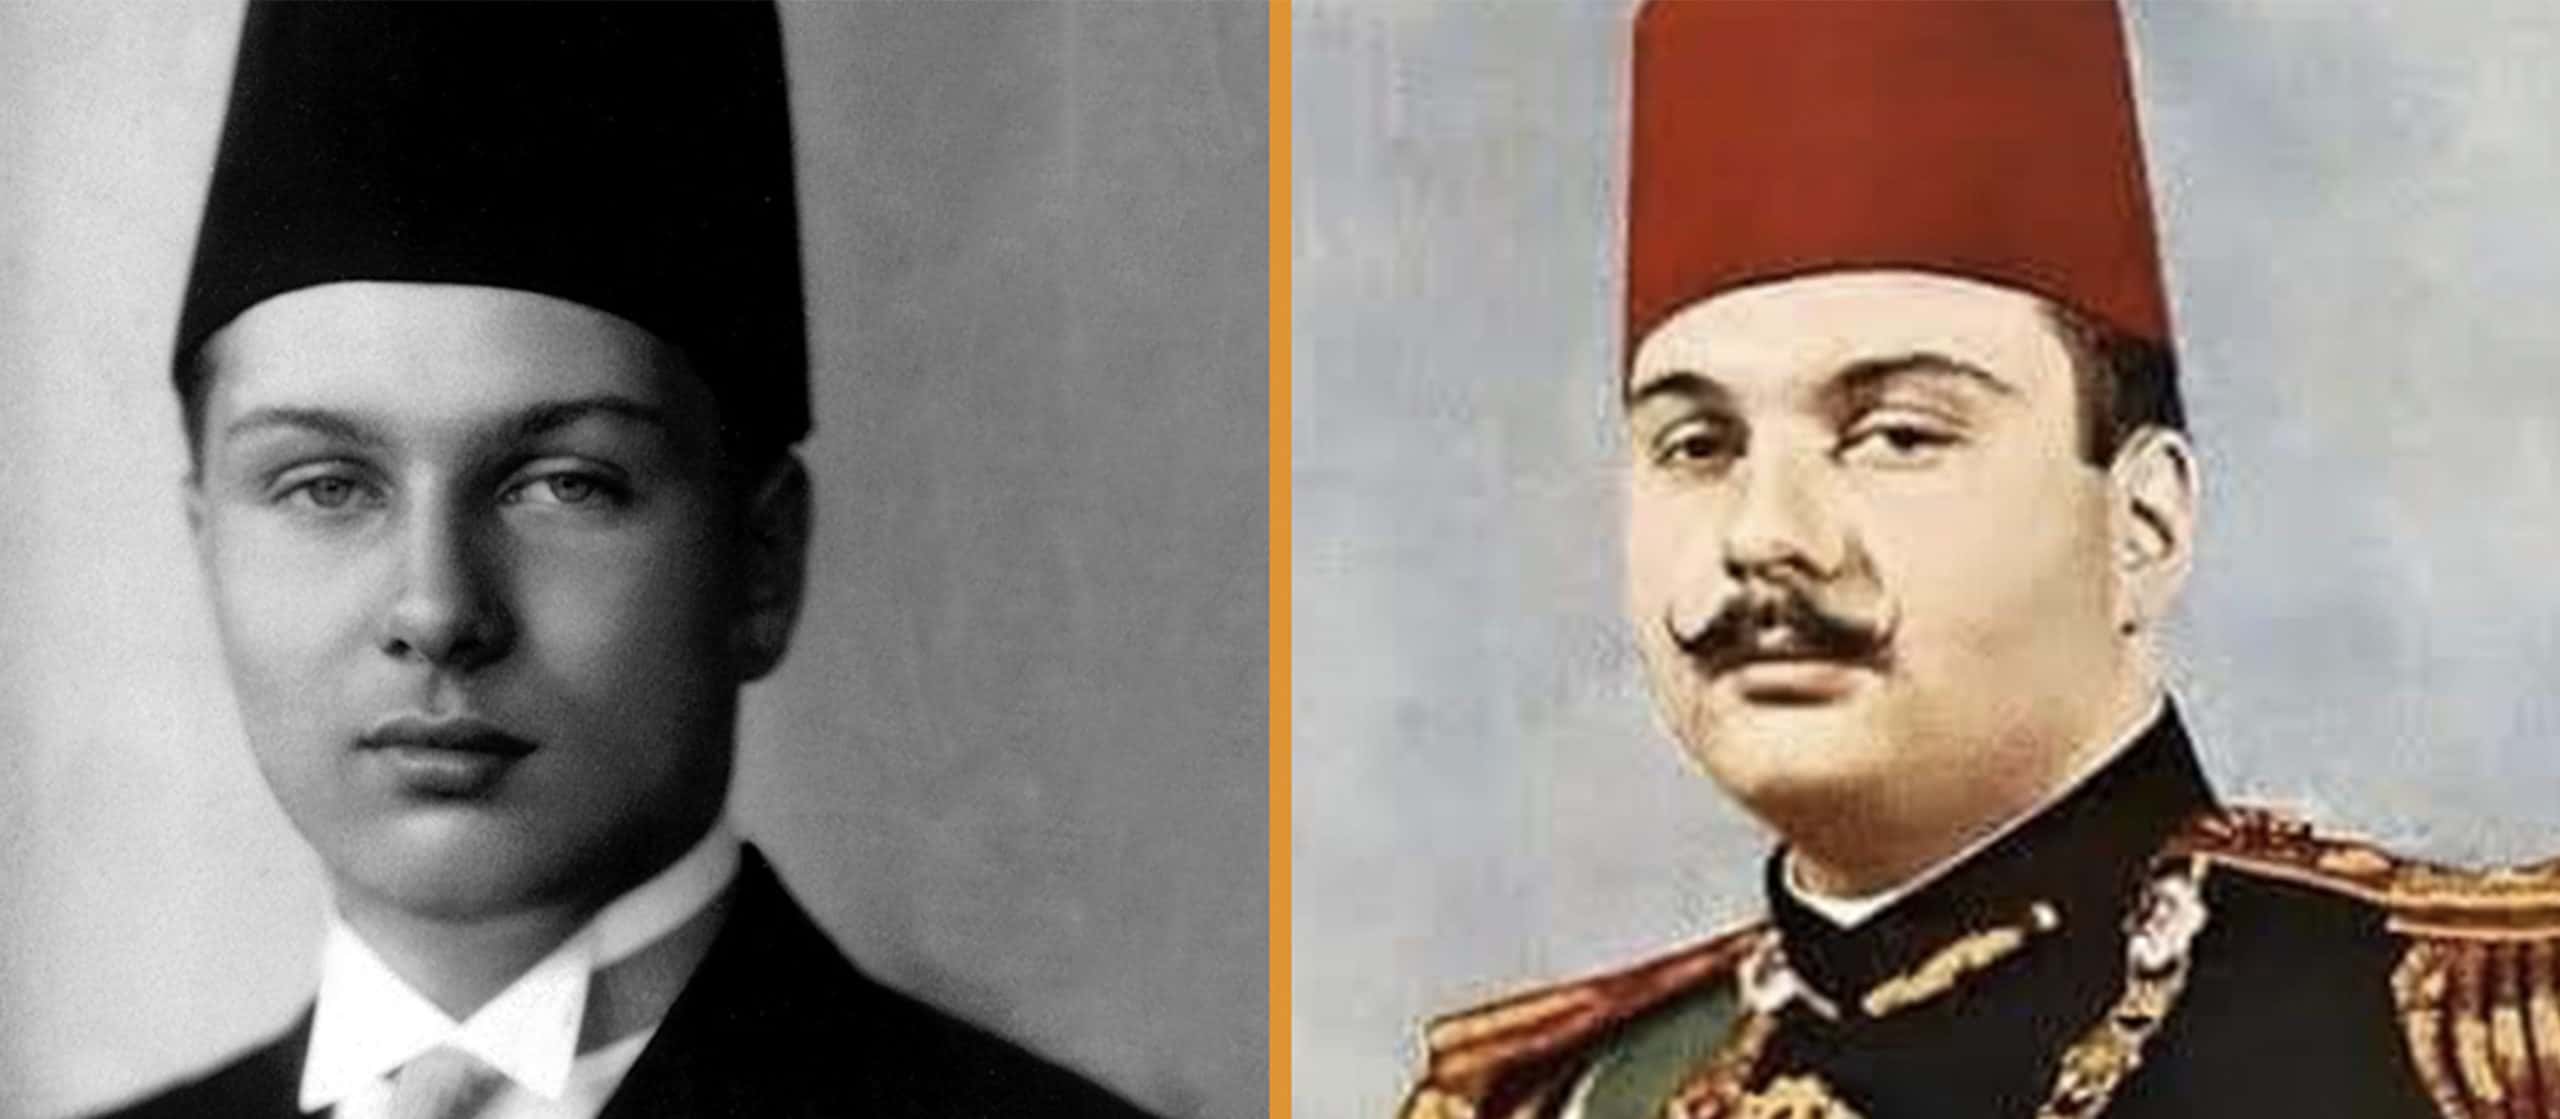 Debauched Facts About Farouk Of Egypt, The King Of The Night